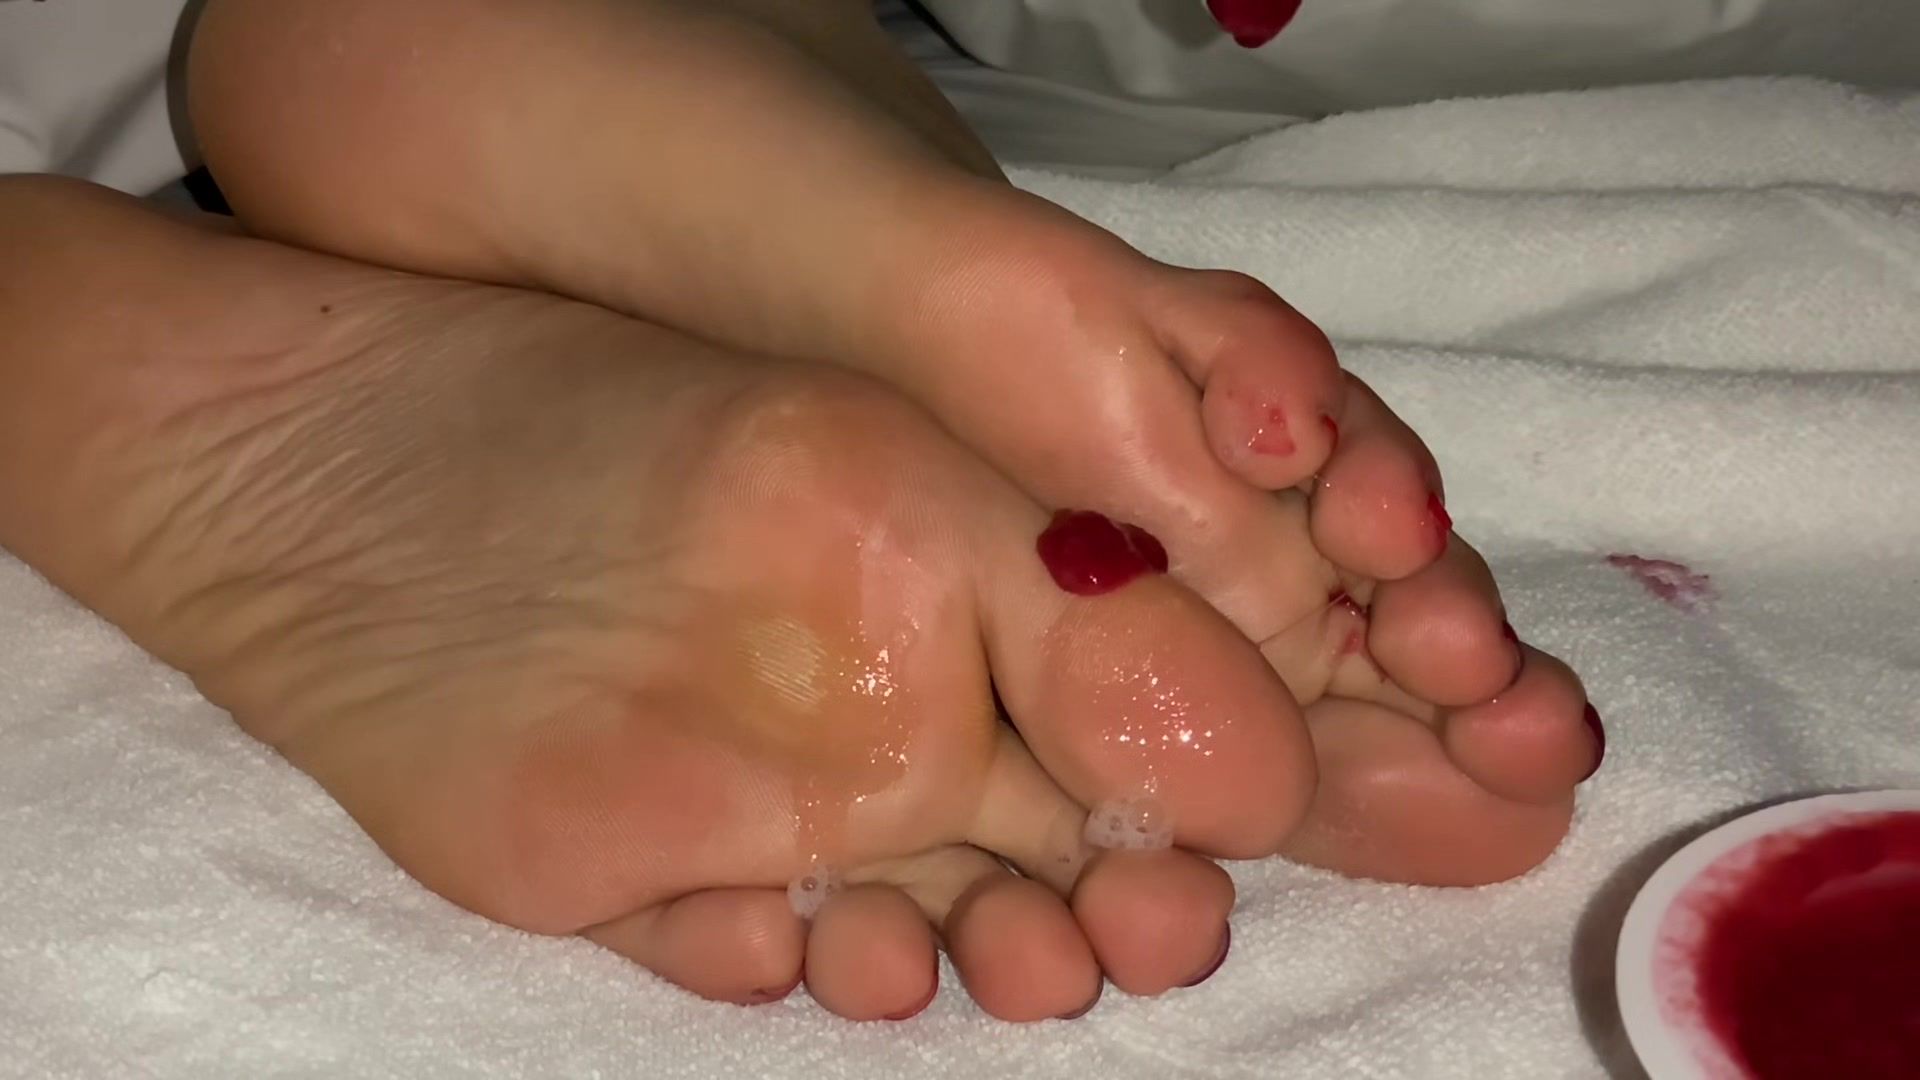 Milflix Giorgiafeet Slave- Please Lick And Suck The Dirty Feet Of Your Slut Nudist - 1